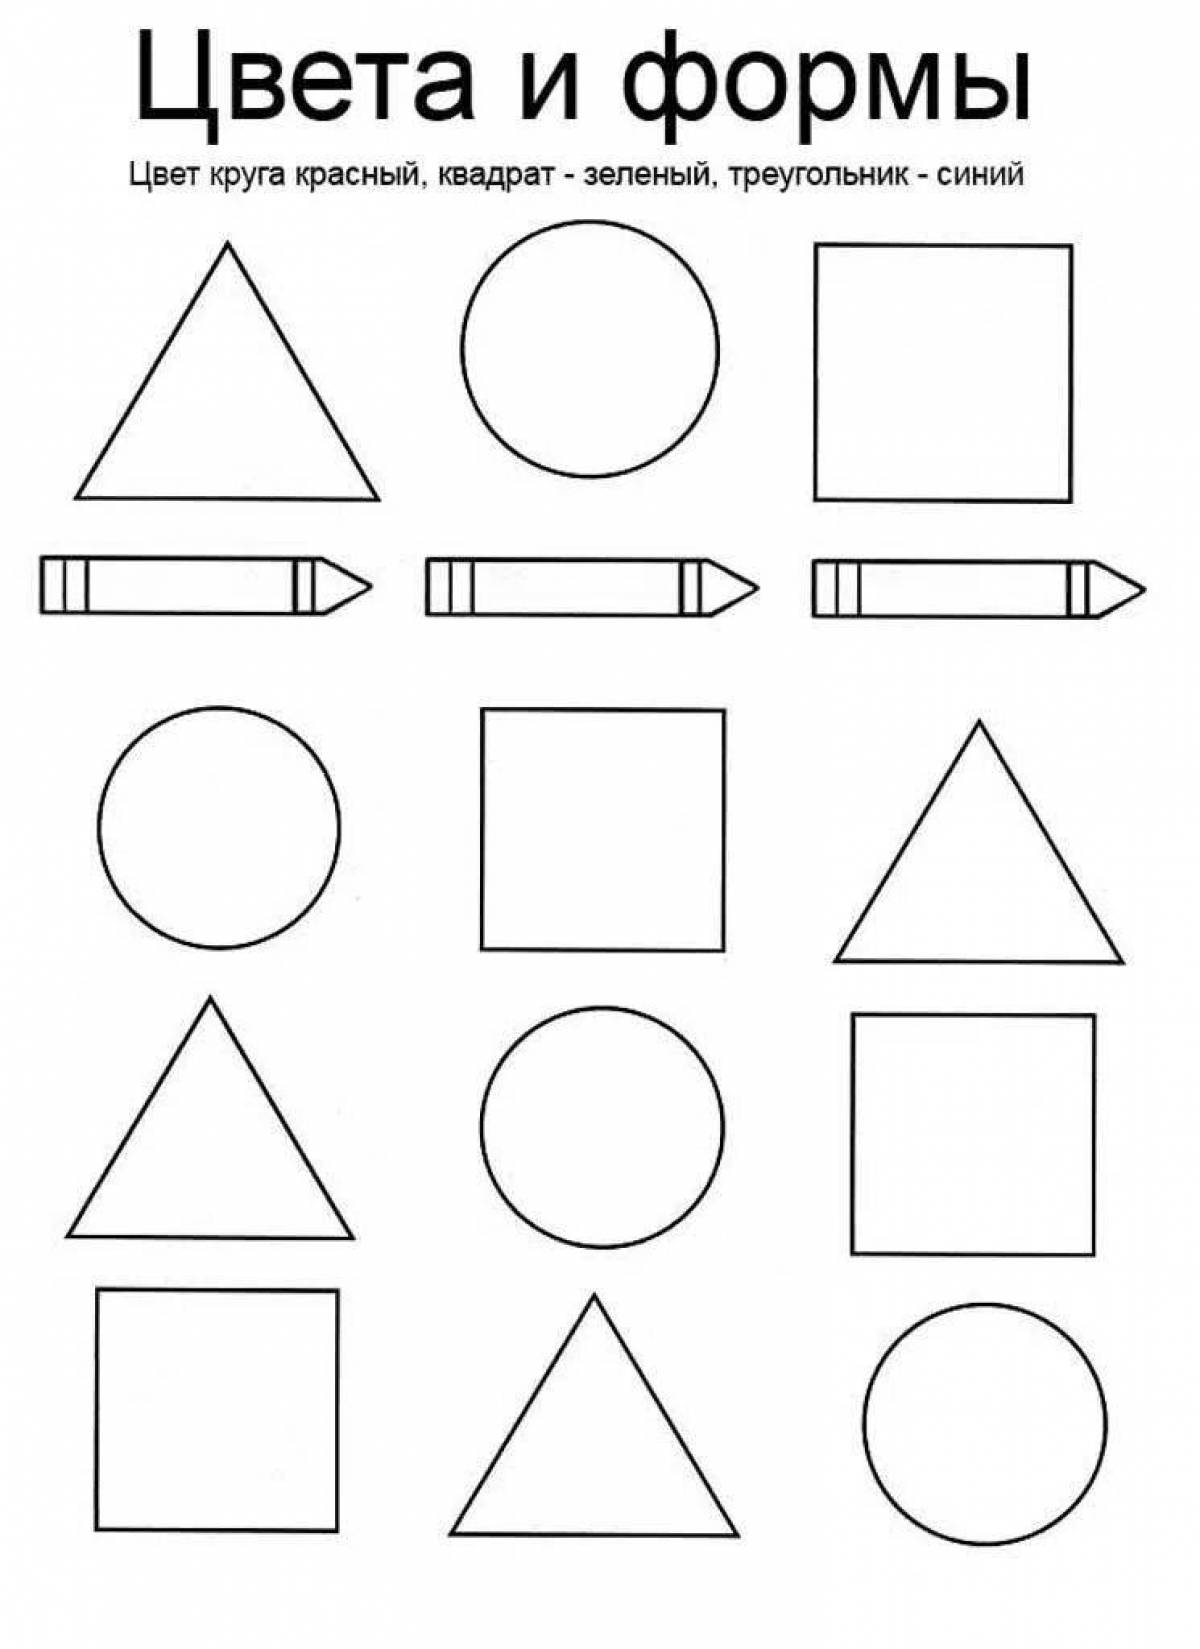 Geometric shapes for kids 6 7 years old #27